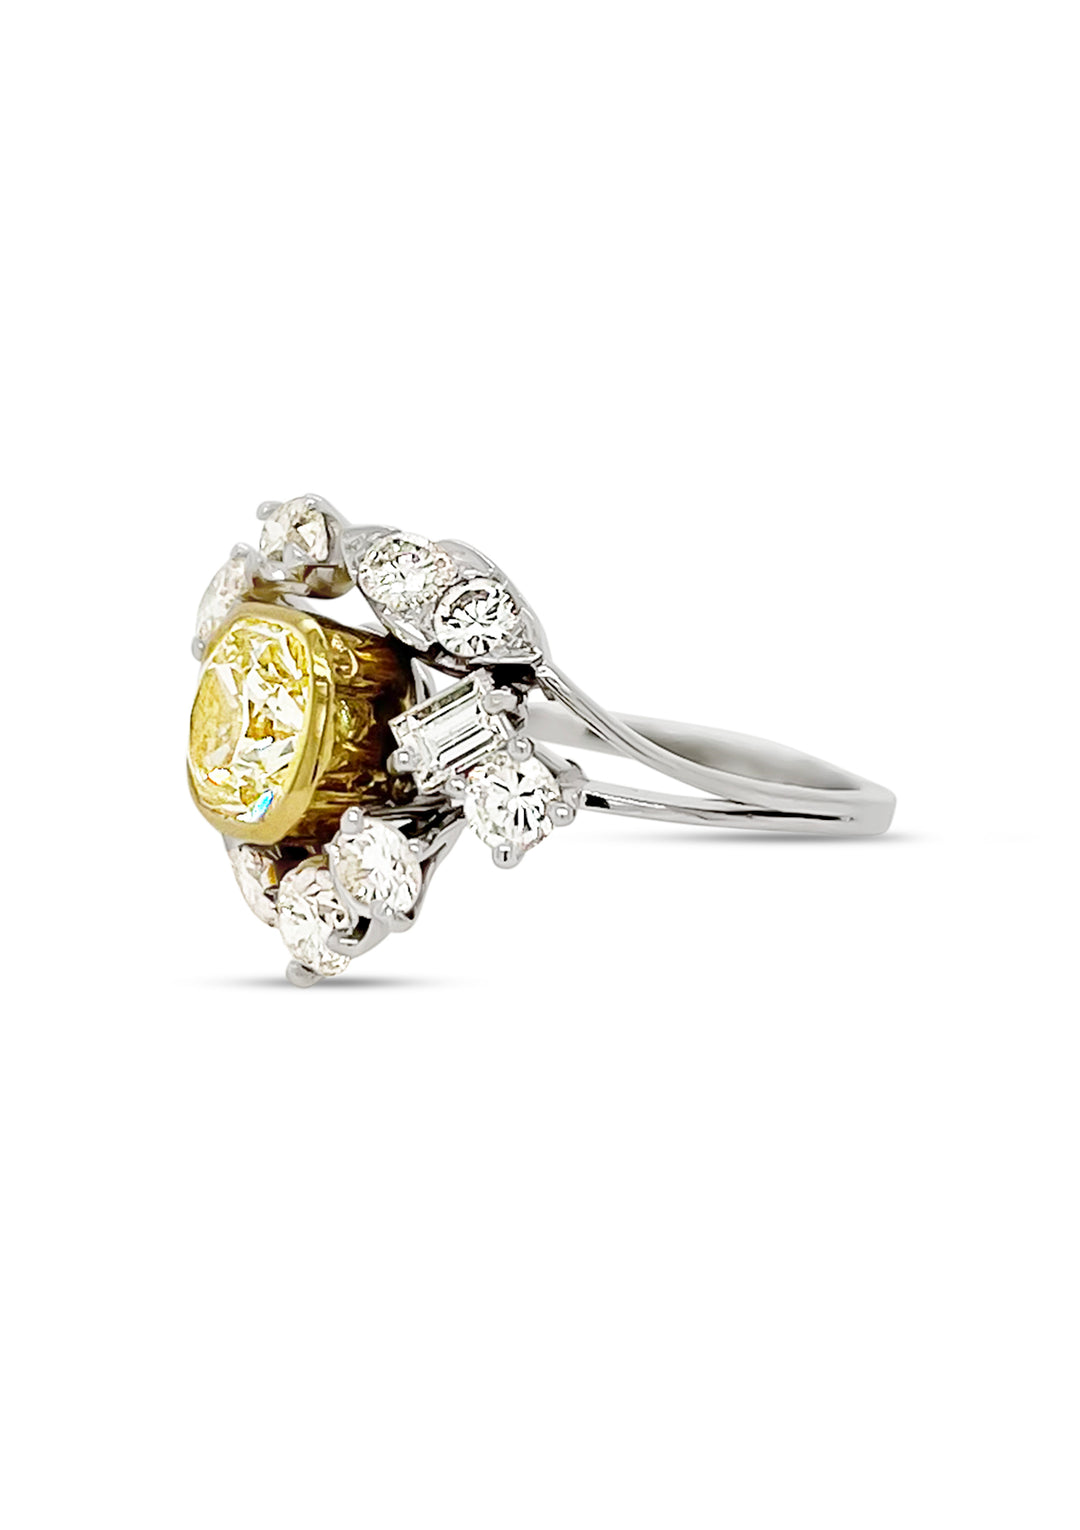 18K Two Tone 1.40 Carat Fancy Yellow Diamond Accented Ring